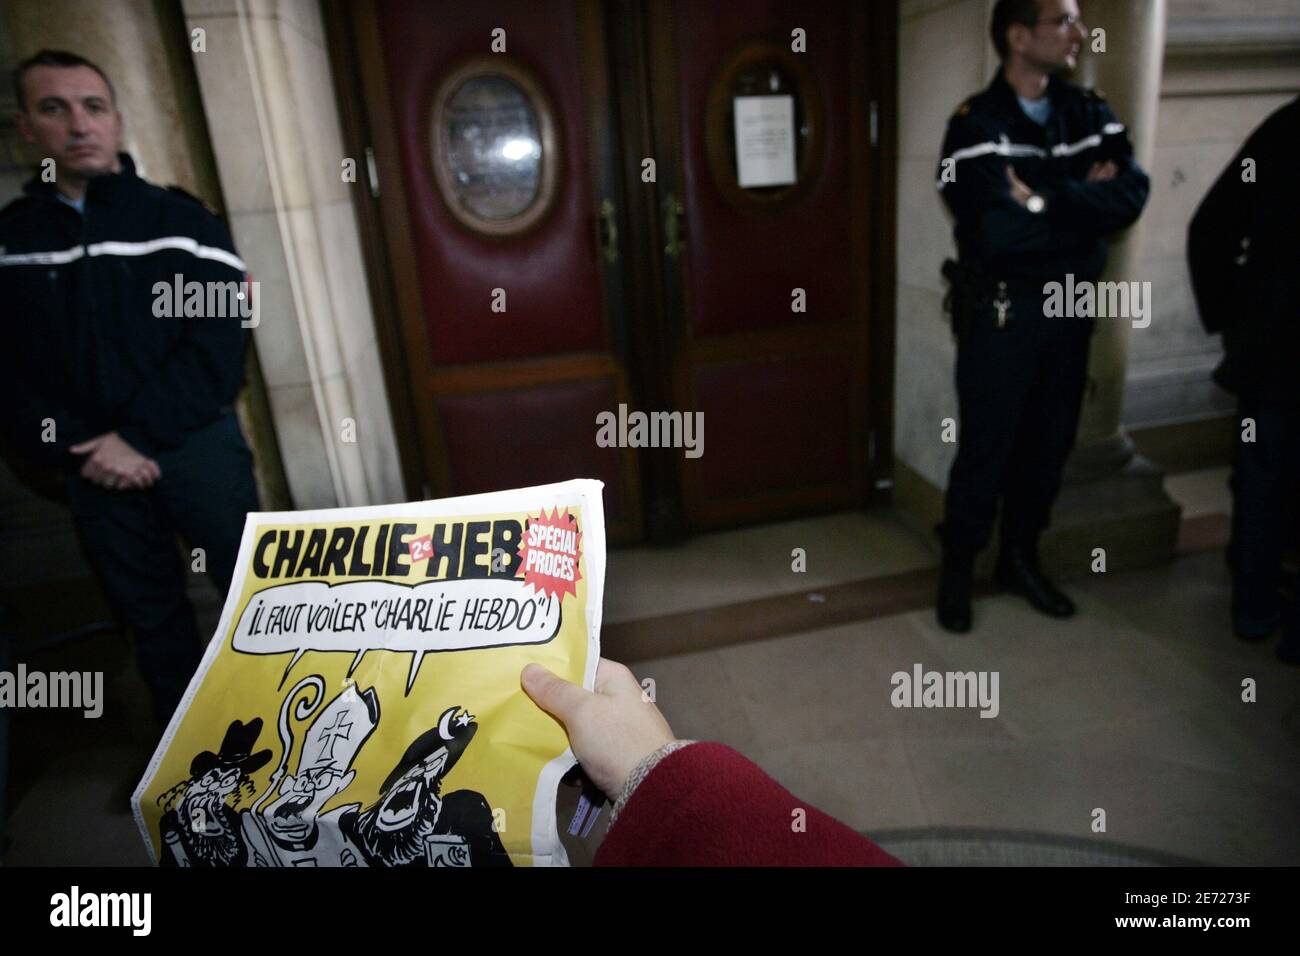 Someone reads Charlie Hebdo at the Court of Paris during the lawsuit against Charlie Hebdo, French satirical weekly magazine which printed cartoons of the Prophet Muhammad, in Paris, France on February 8, 2007. Photo by Thibault Camus/ABACAPRESS Stock Photo